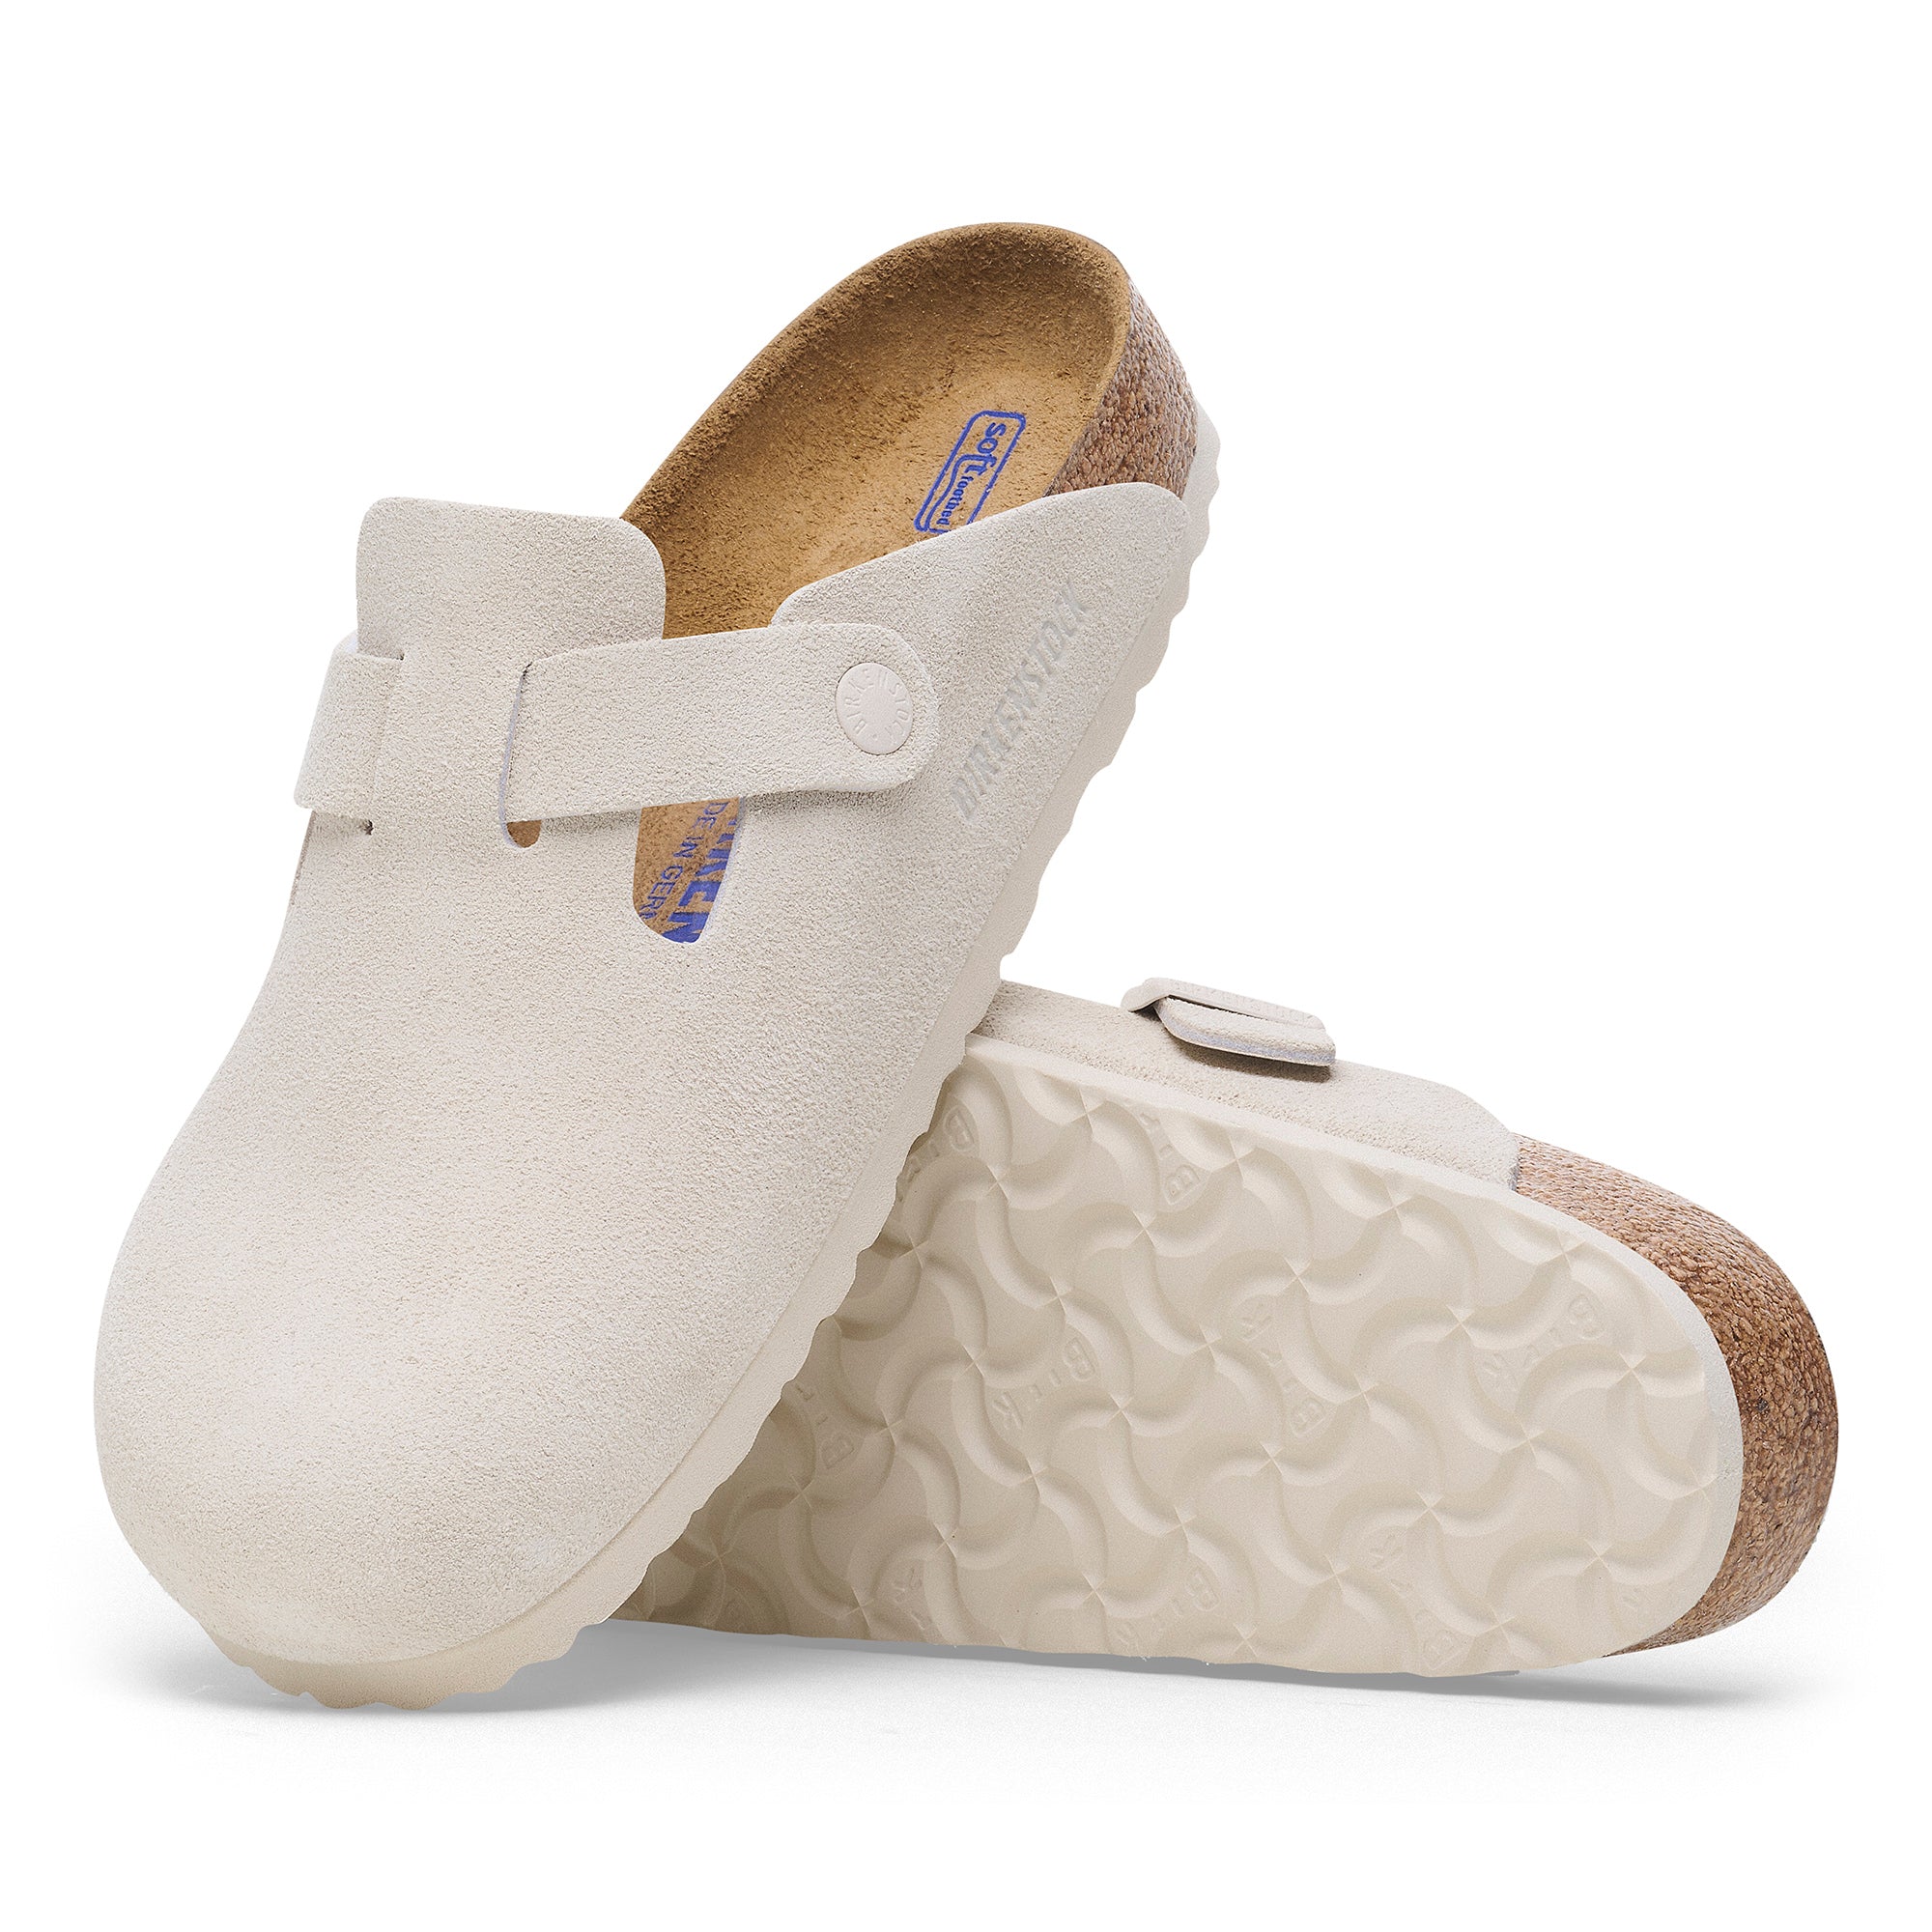 Birkenstock Limited Edition Boston Soft Footbed antique white suede